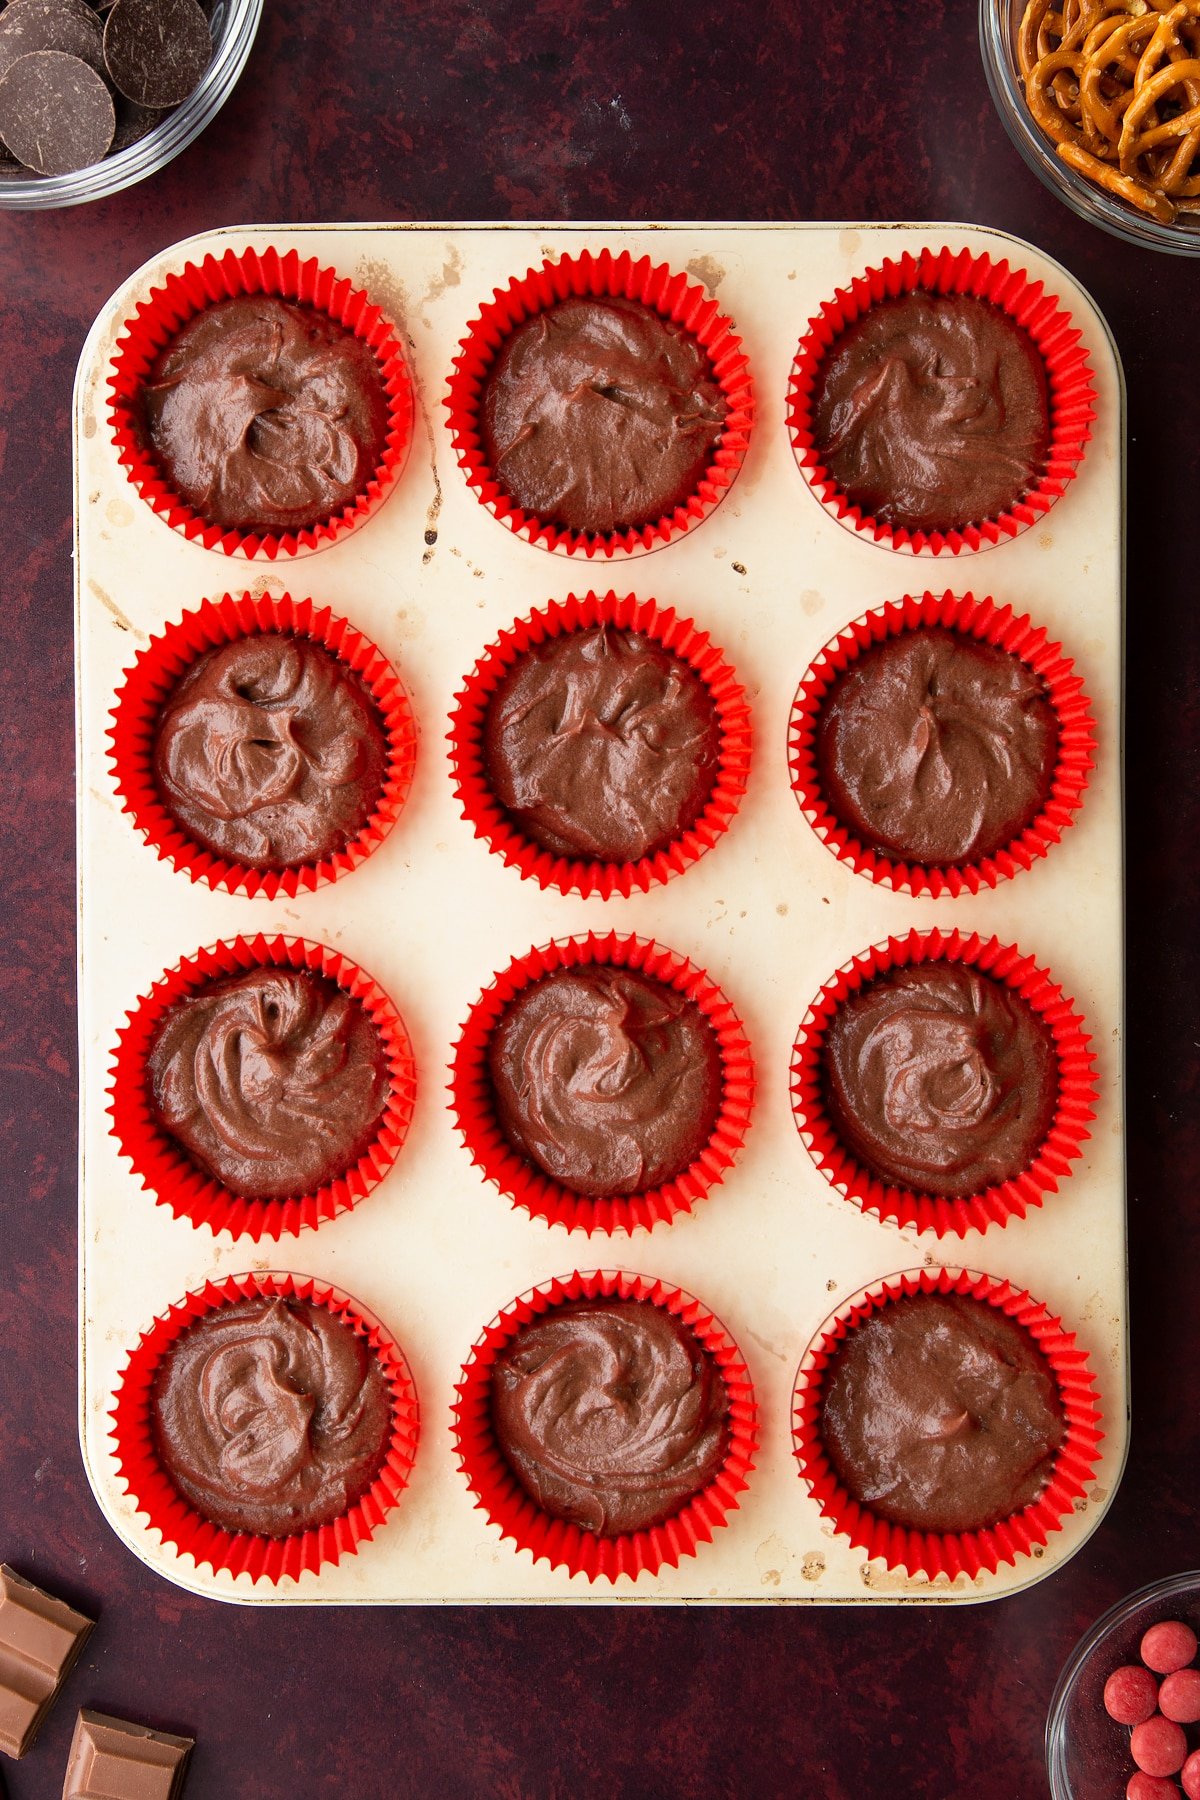 Chocolate cake batter in red cupcake cases in a tray. Ingredients to make reindeer cupcakes surround the tray.